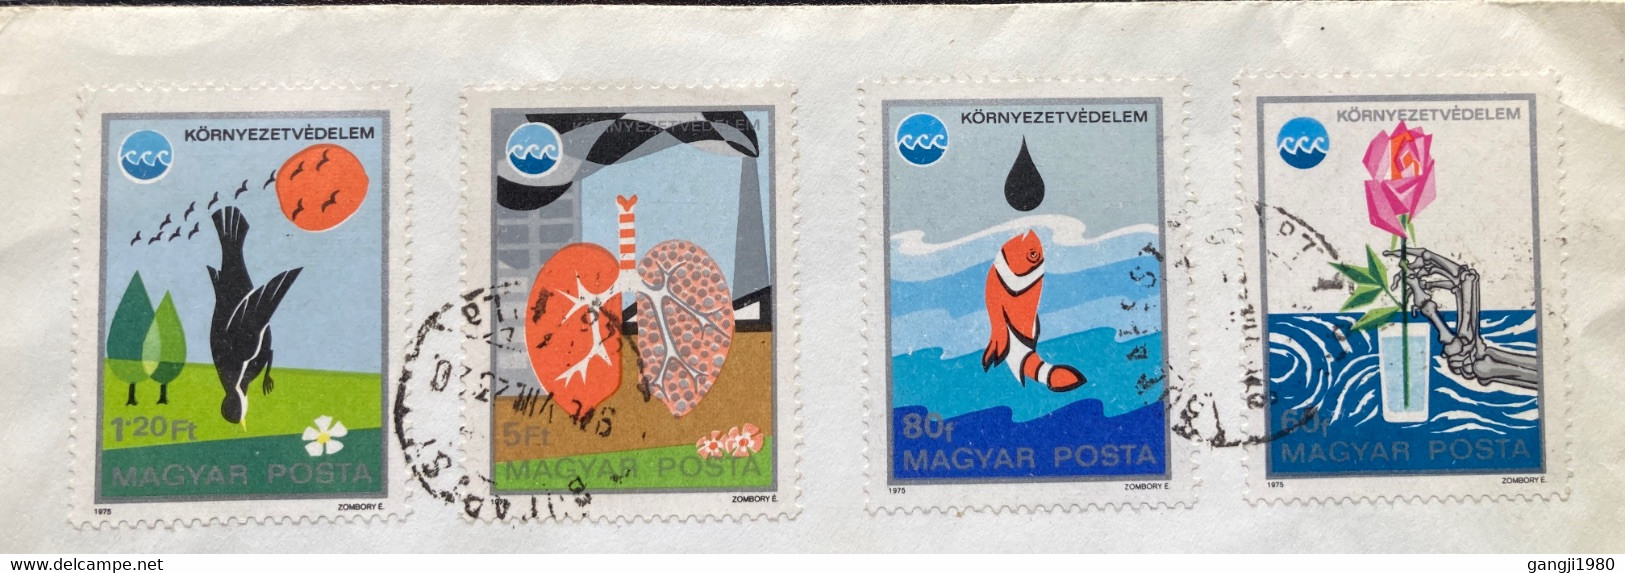 HUNGARY 1975, POLLUTION OF WATER,RIVER,ART,SMOKE ,HEALTH 4 STAMPS,COVER TO ENGLAND - Covers & Documents